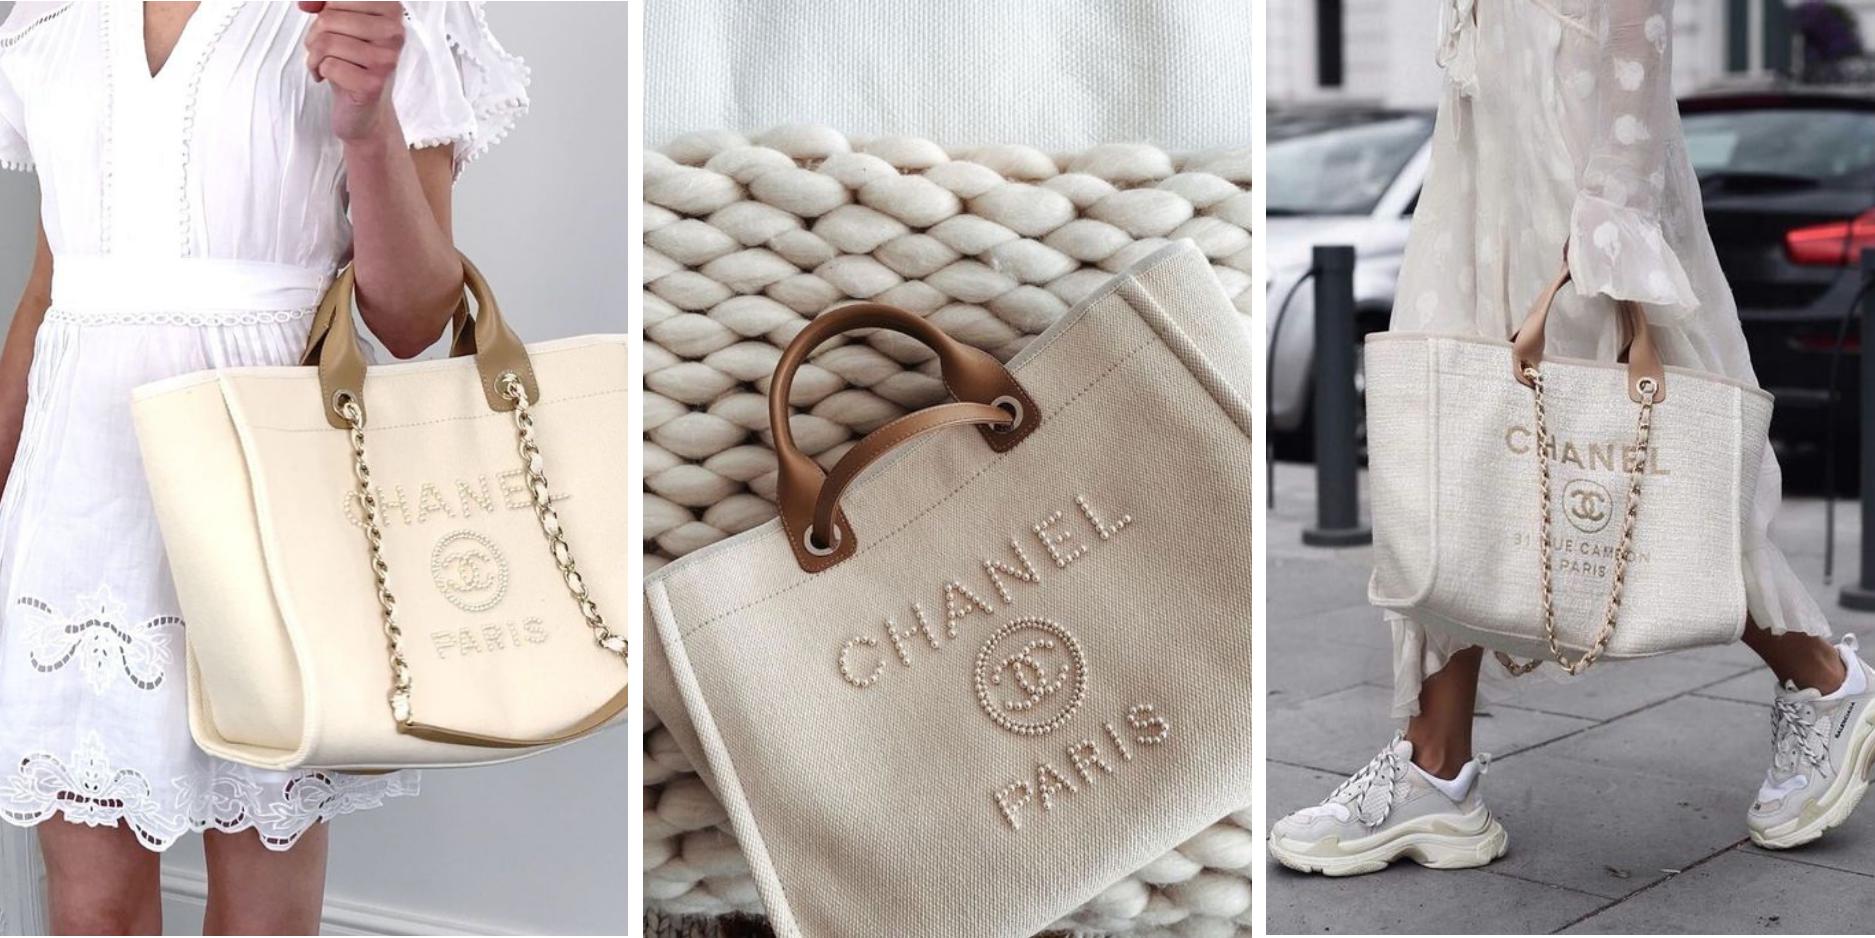 Chanel Deauville Tote for a Vacation in France - Shopping and Info